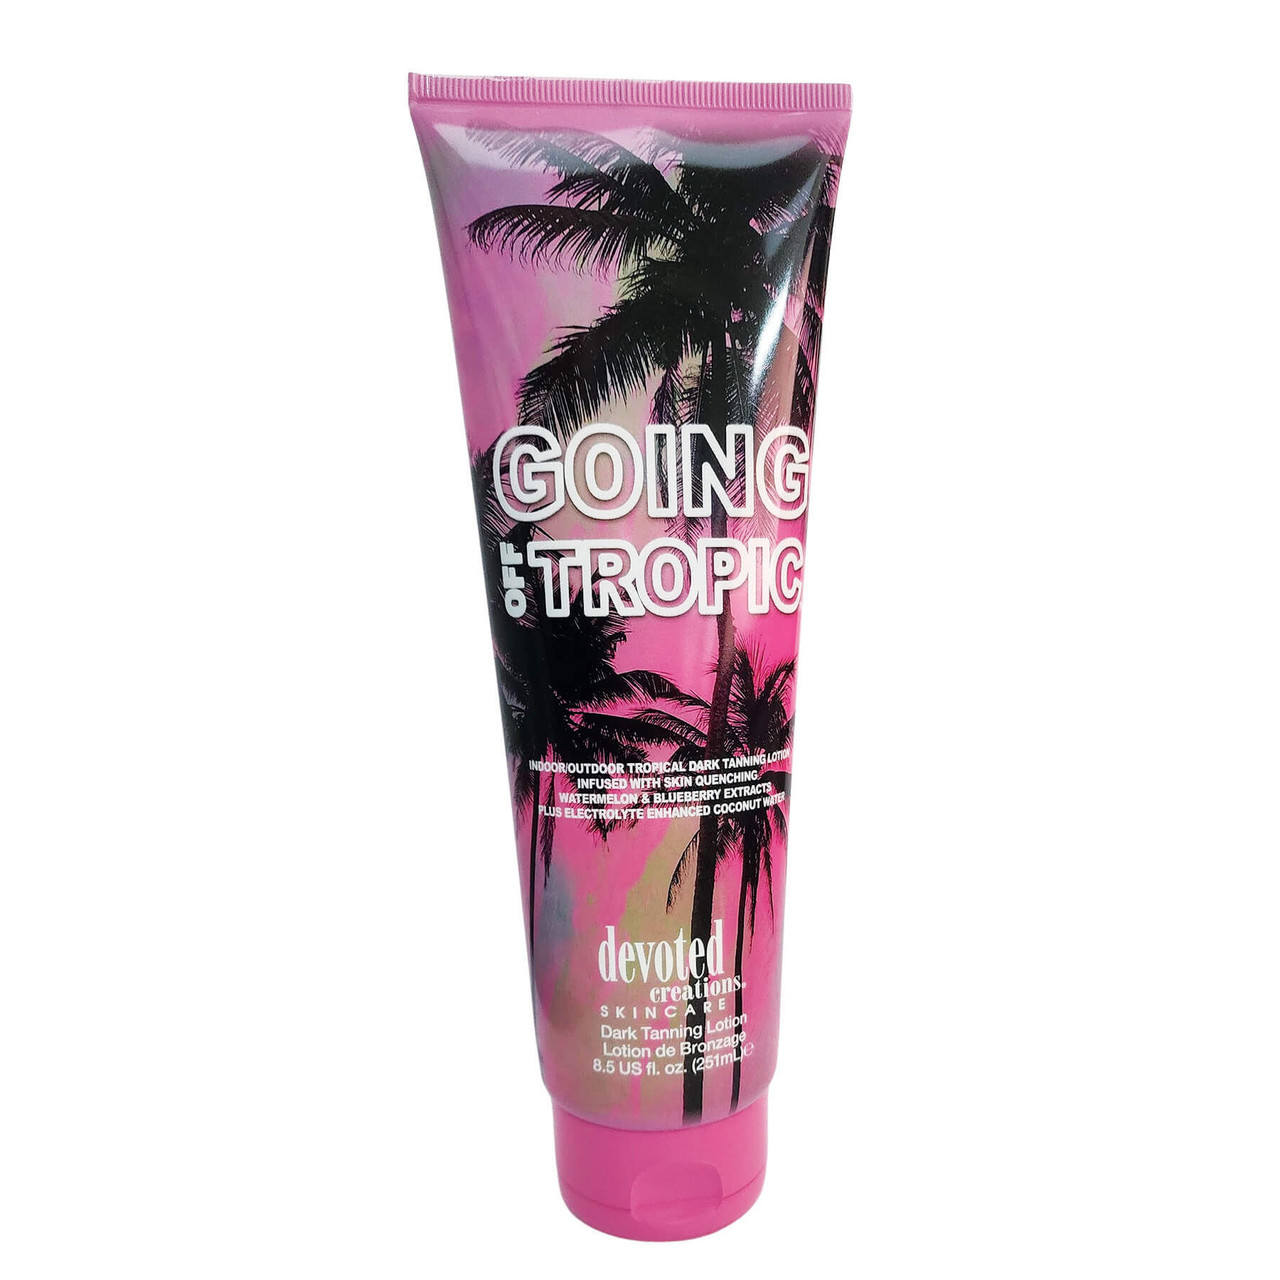 Devoted Creations Going Off Tropic Dark Tanning Lotion - 8.5 oz.